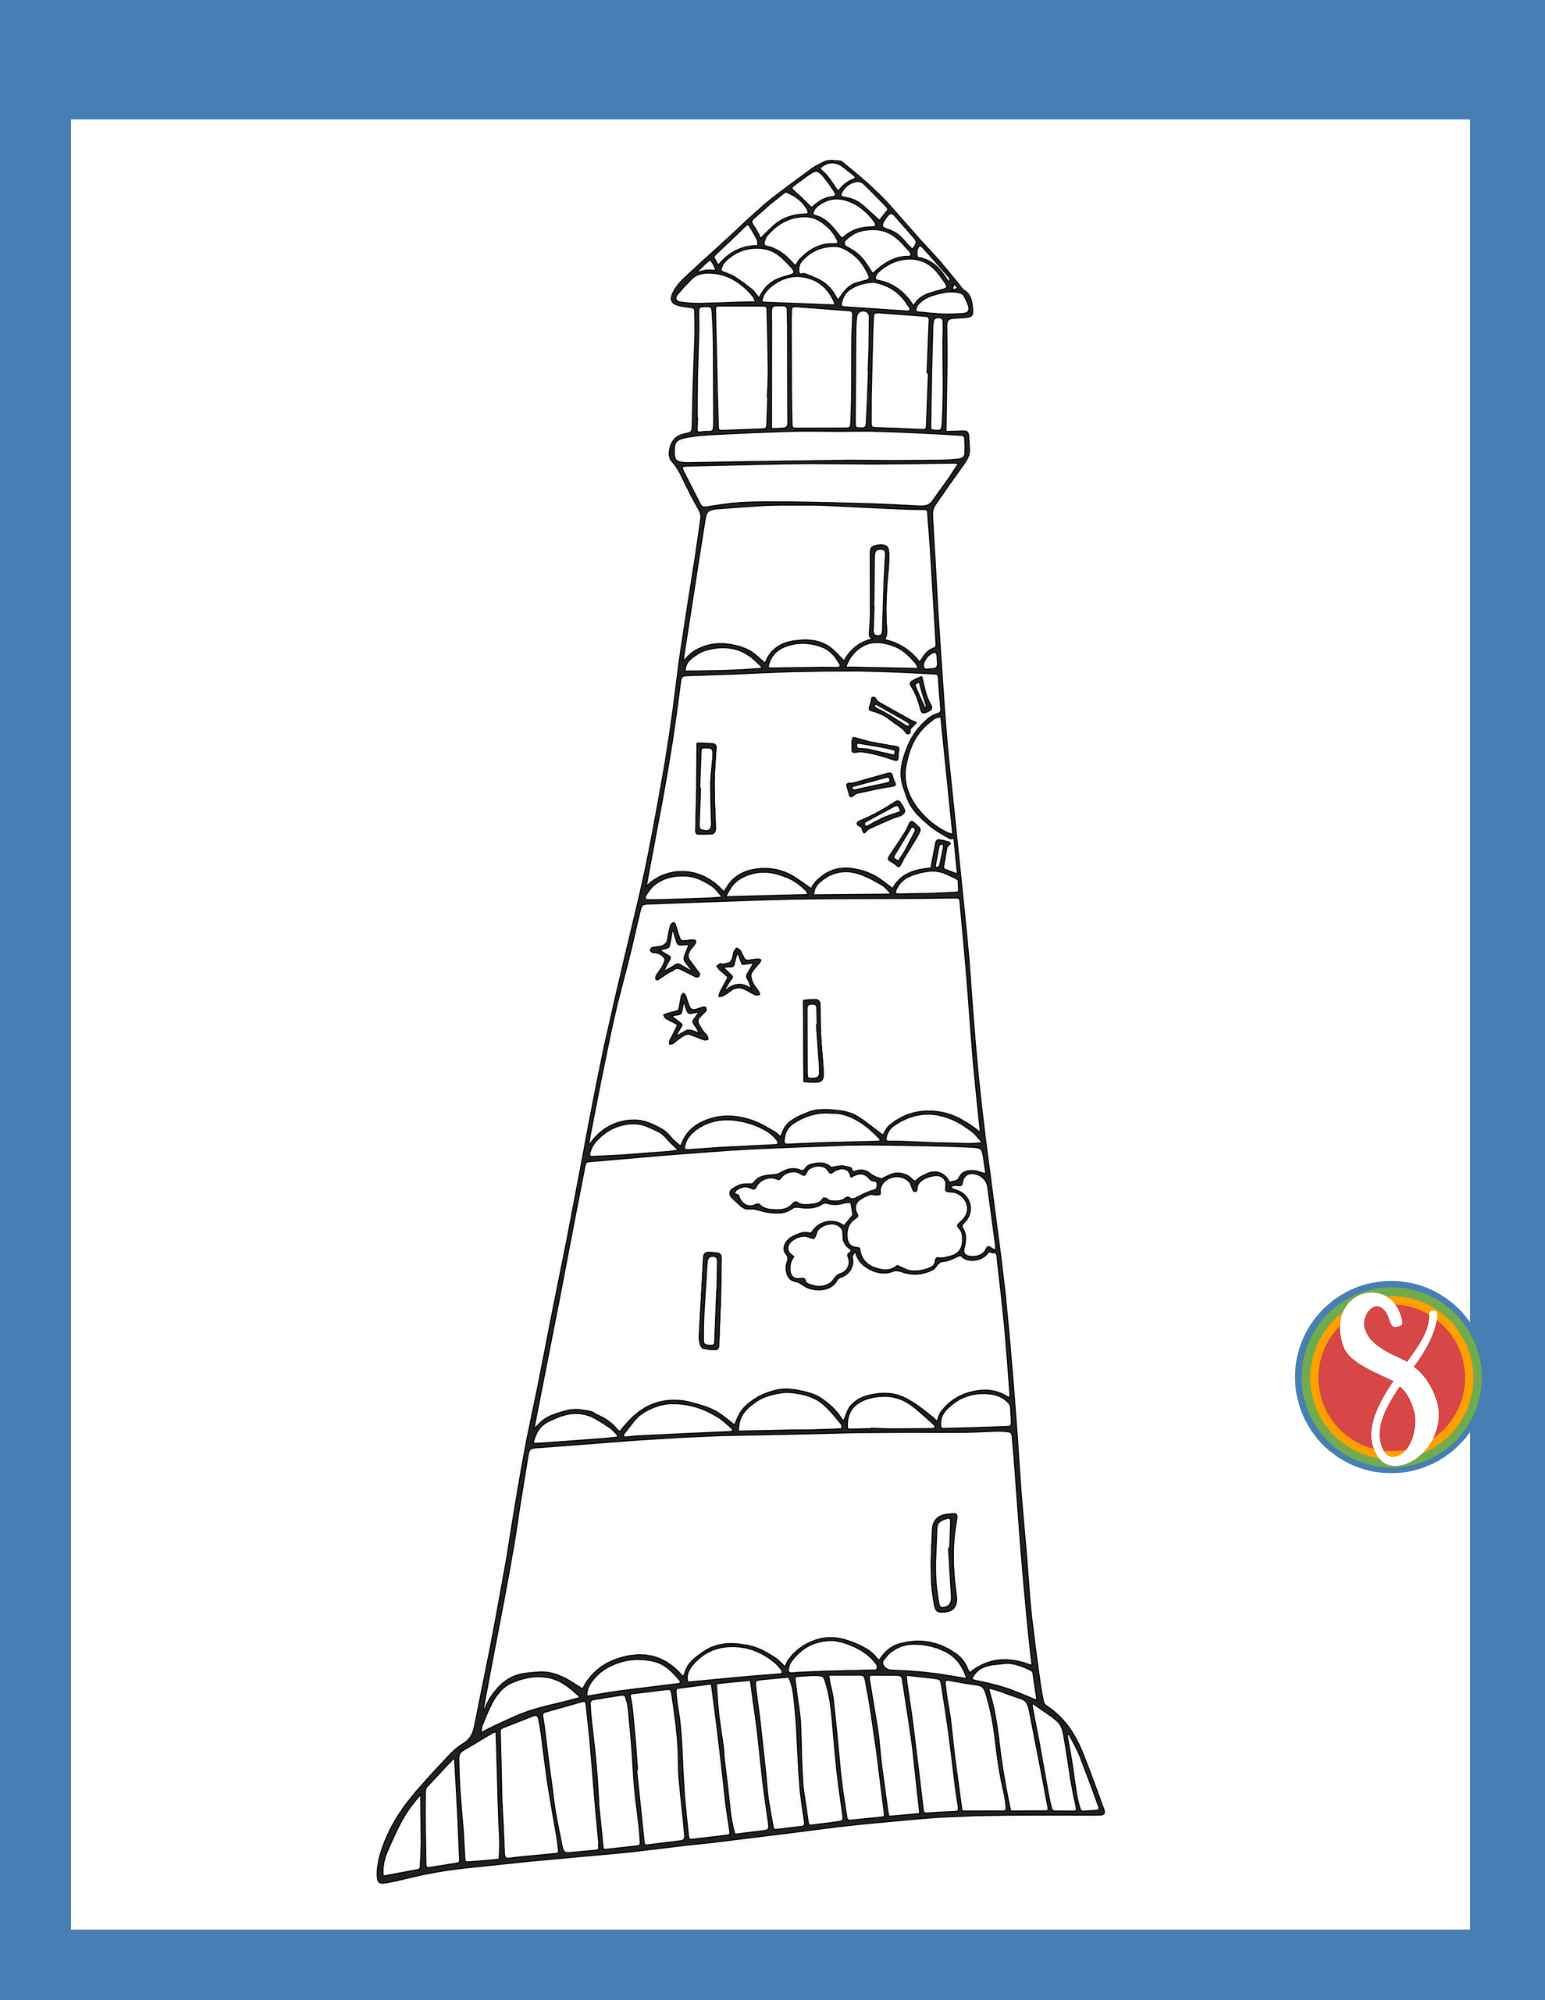 coloring page of a lighthouse with sun, stars, clouds drawn on the side